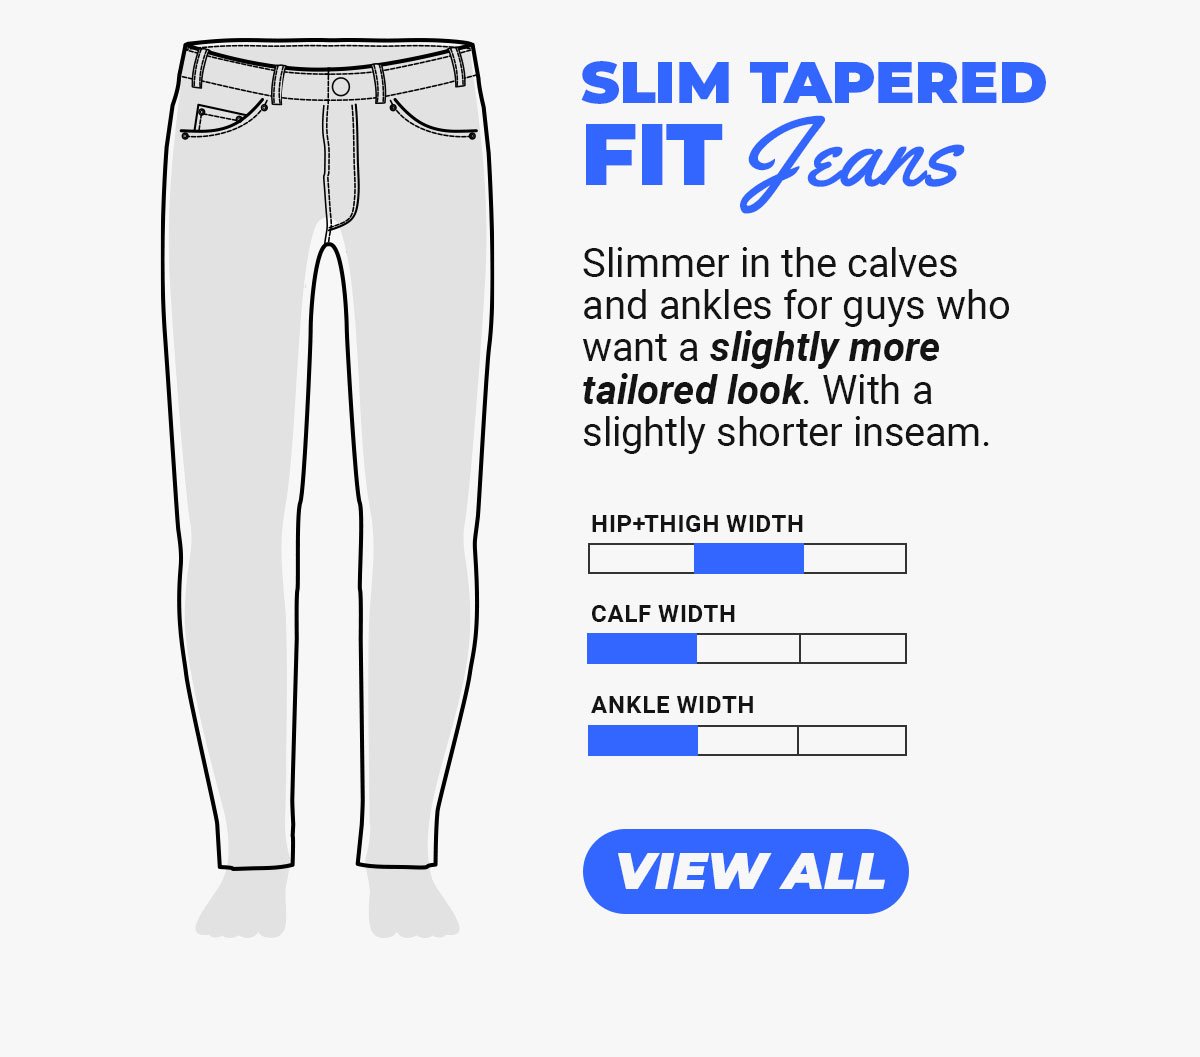 Slim Tapered Fit Jeans. Slimmer in the calves and ankles for guys who want a slightly more tailored look. With a slightly shorter inseam. Button to shop tapered fit jeans.